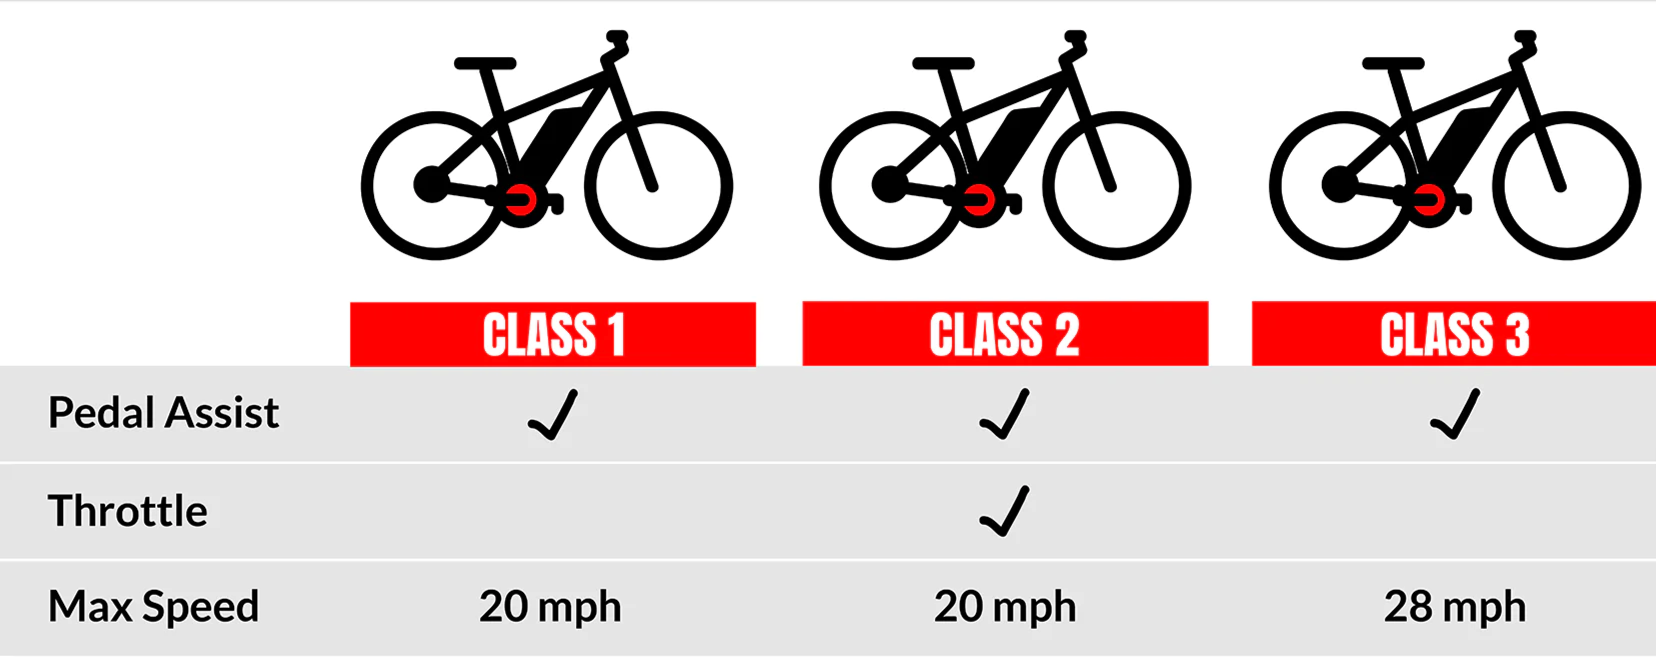 what-is-the-difference-between-class-1-class-2-and-class-3-ebikes